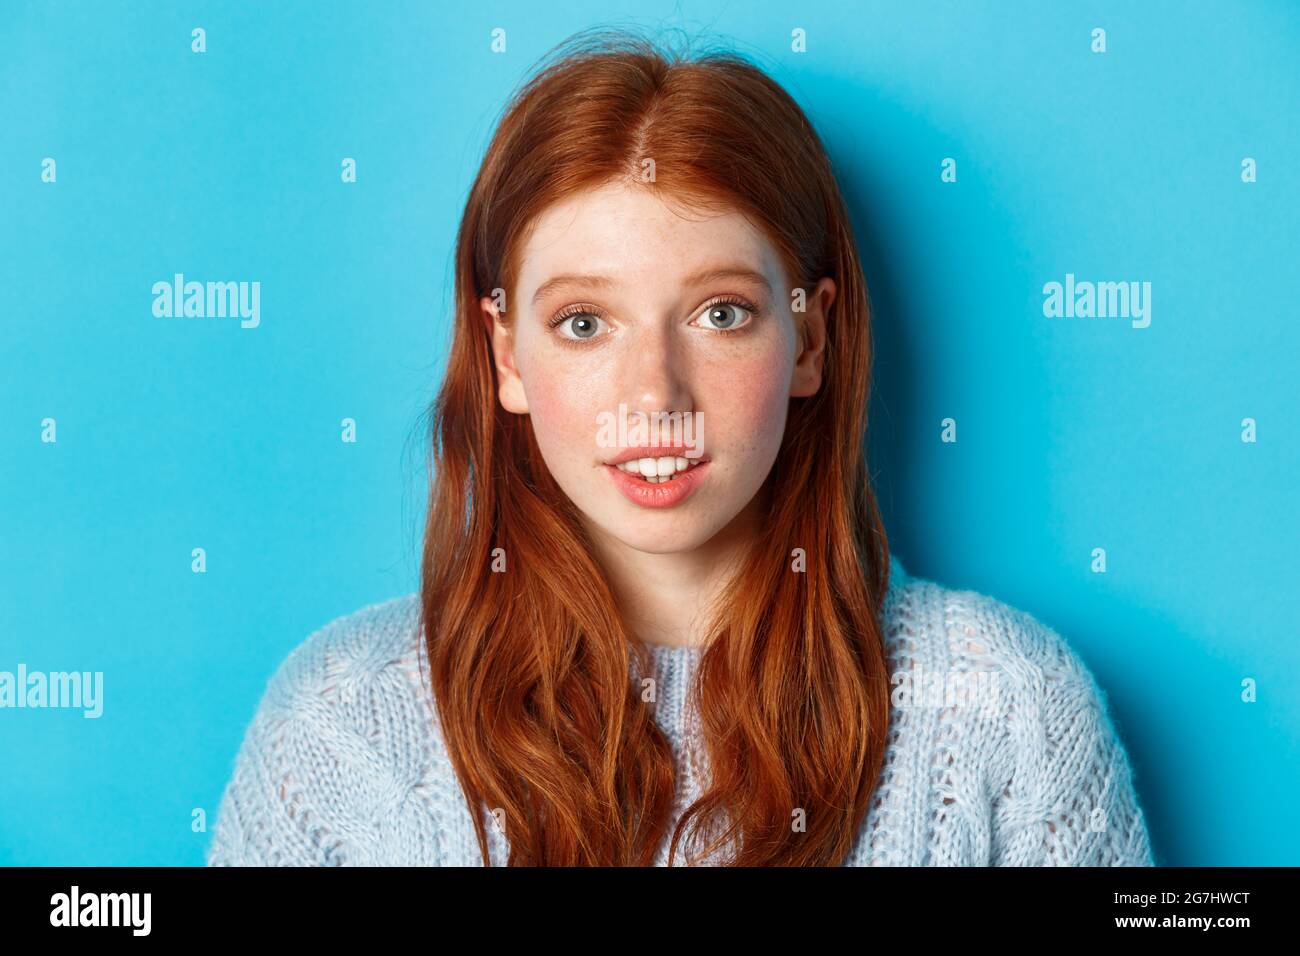 Headshot of cute redhead girl with freckles, looking hopeful and innocent at camera, standing over blue background Stock Photo